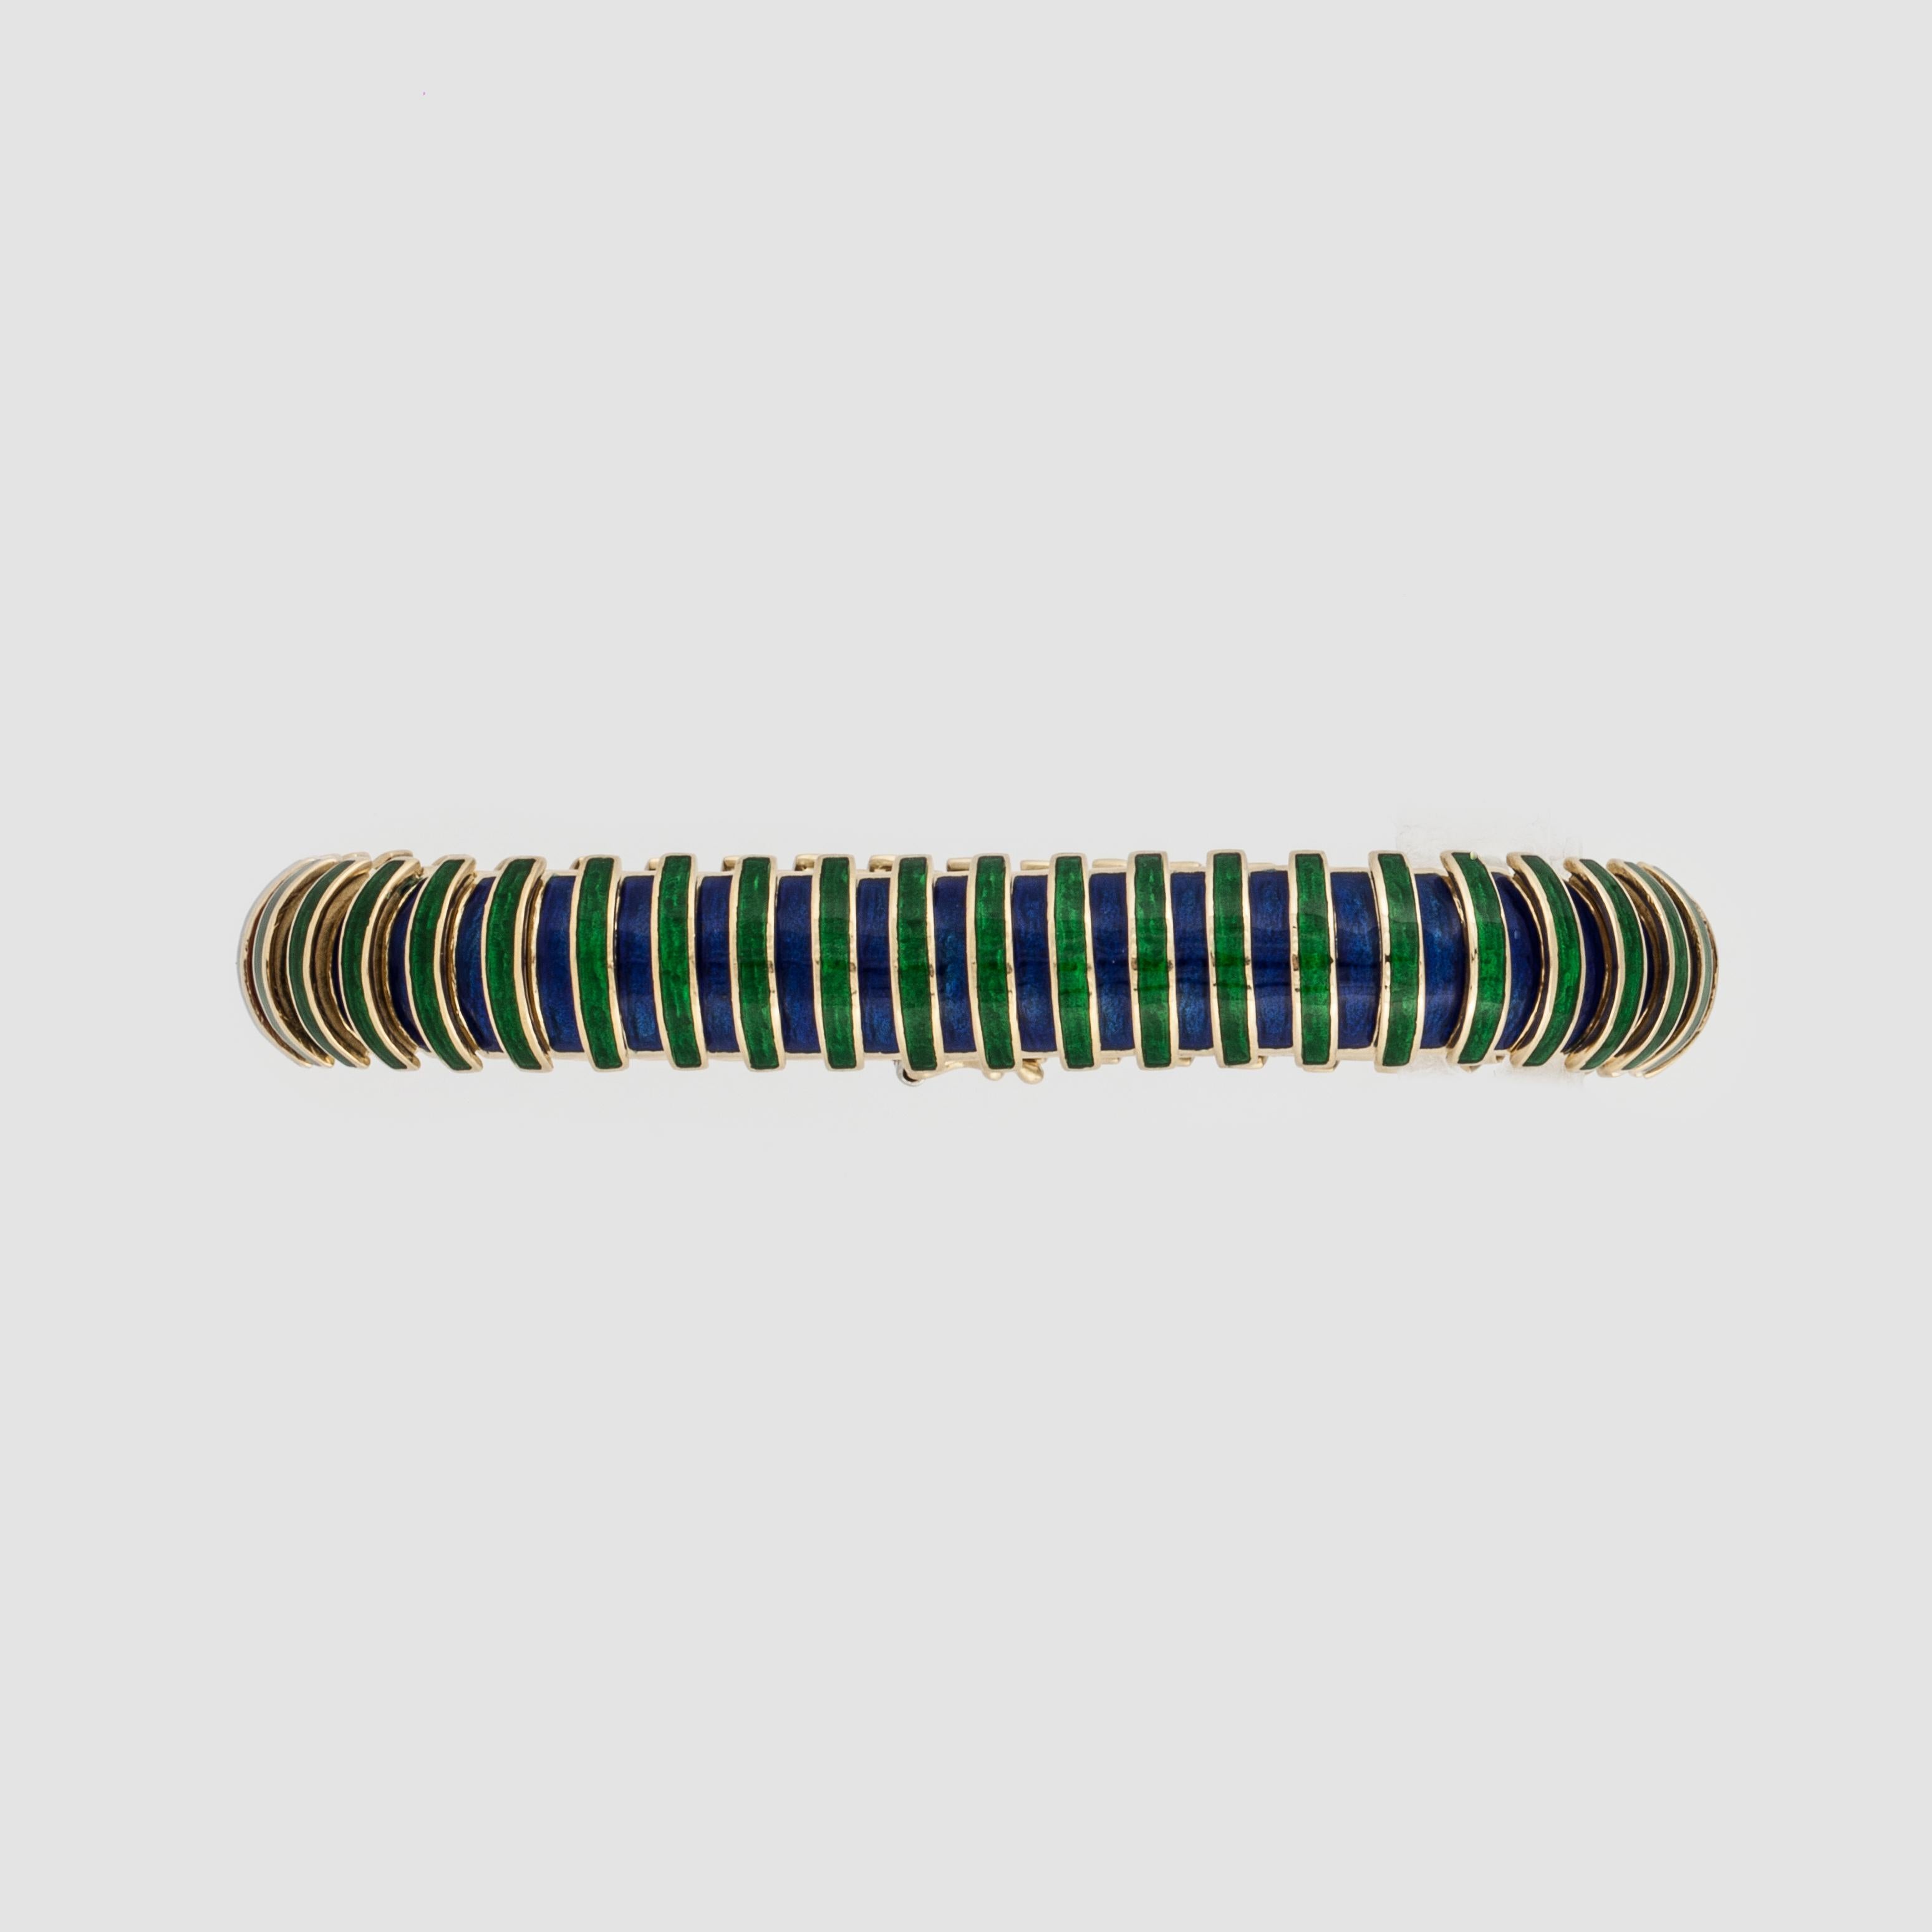 Corletti bracelet is 18K yellow gold with blue and green enamel.  It is marked 